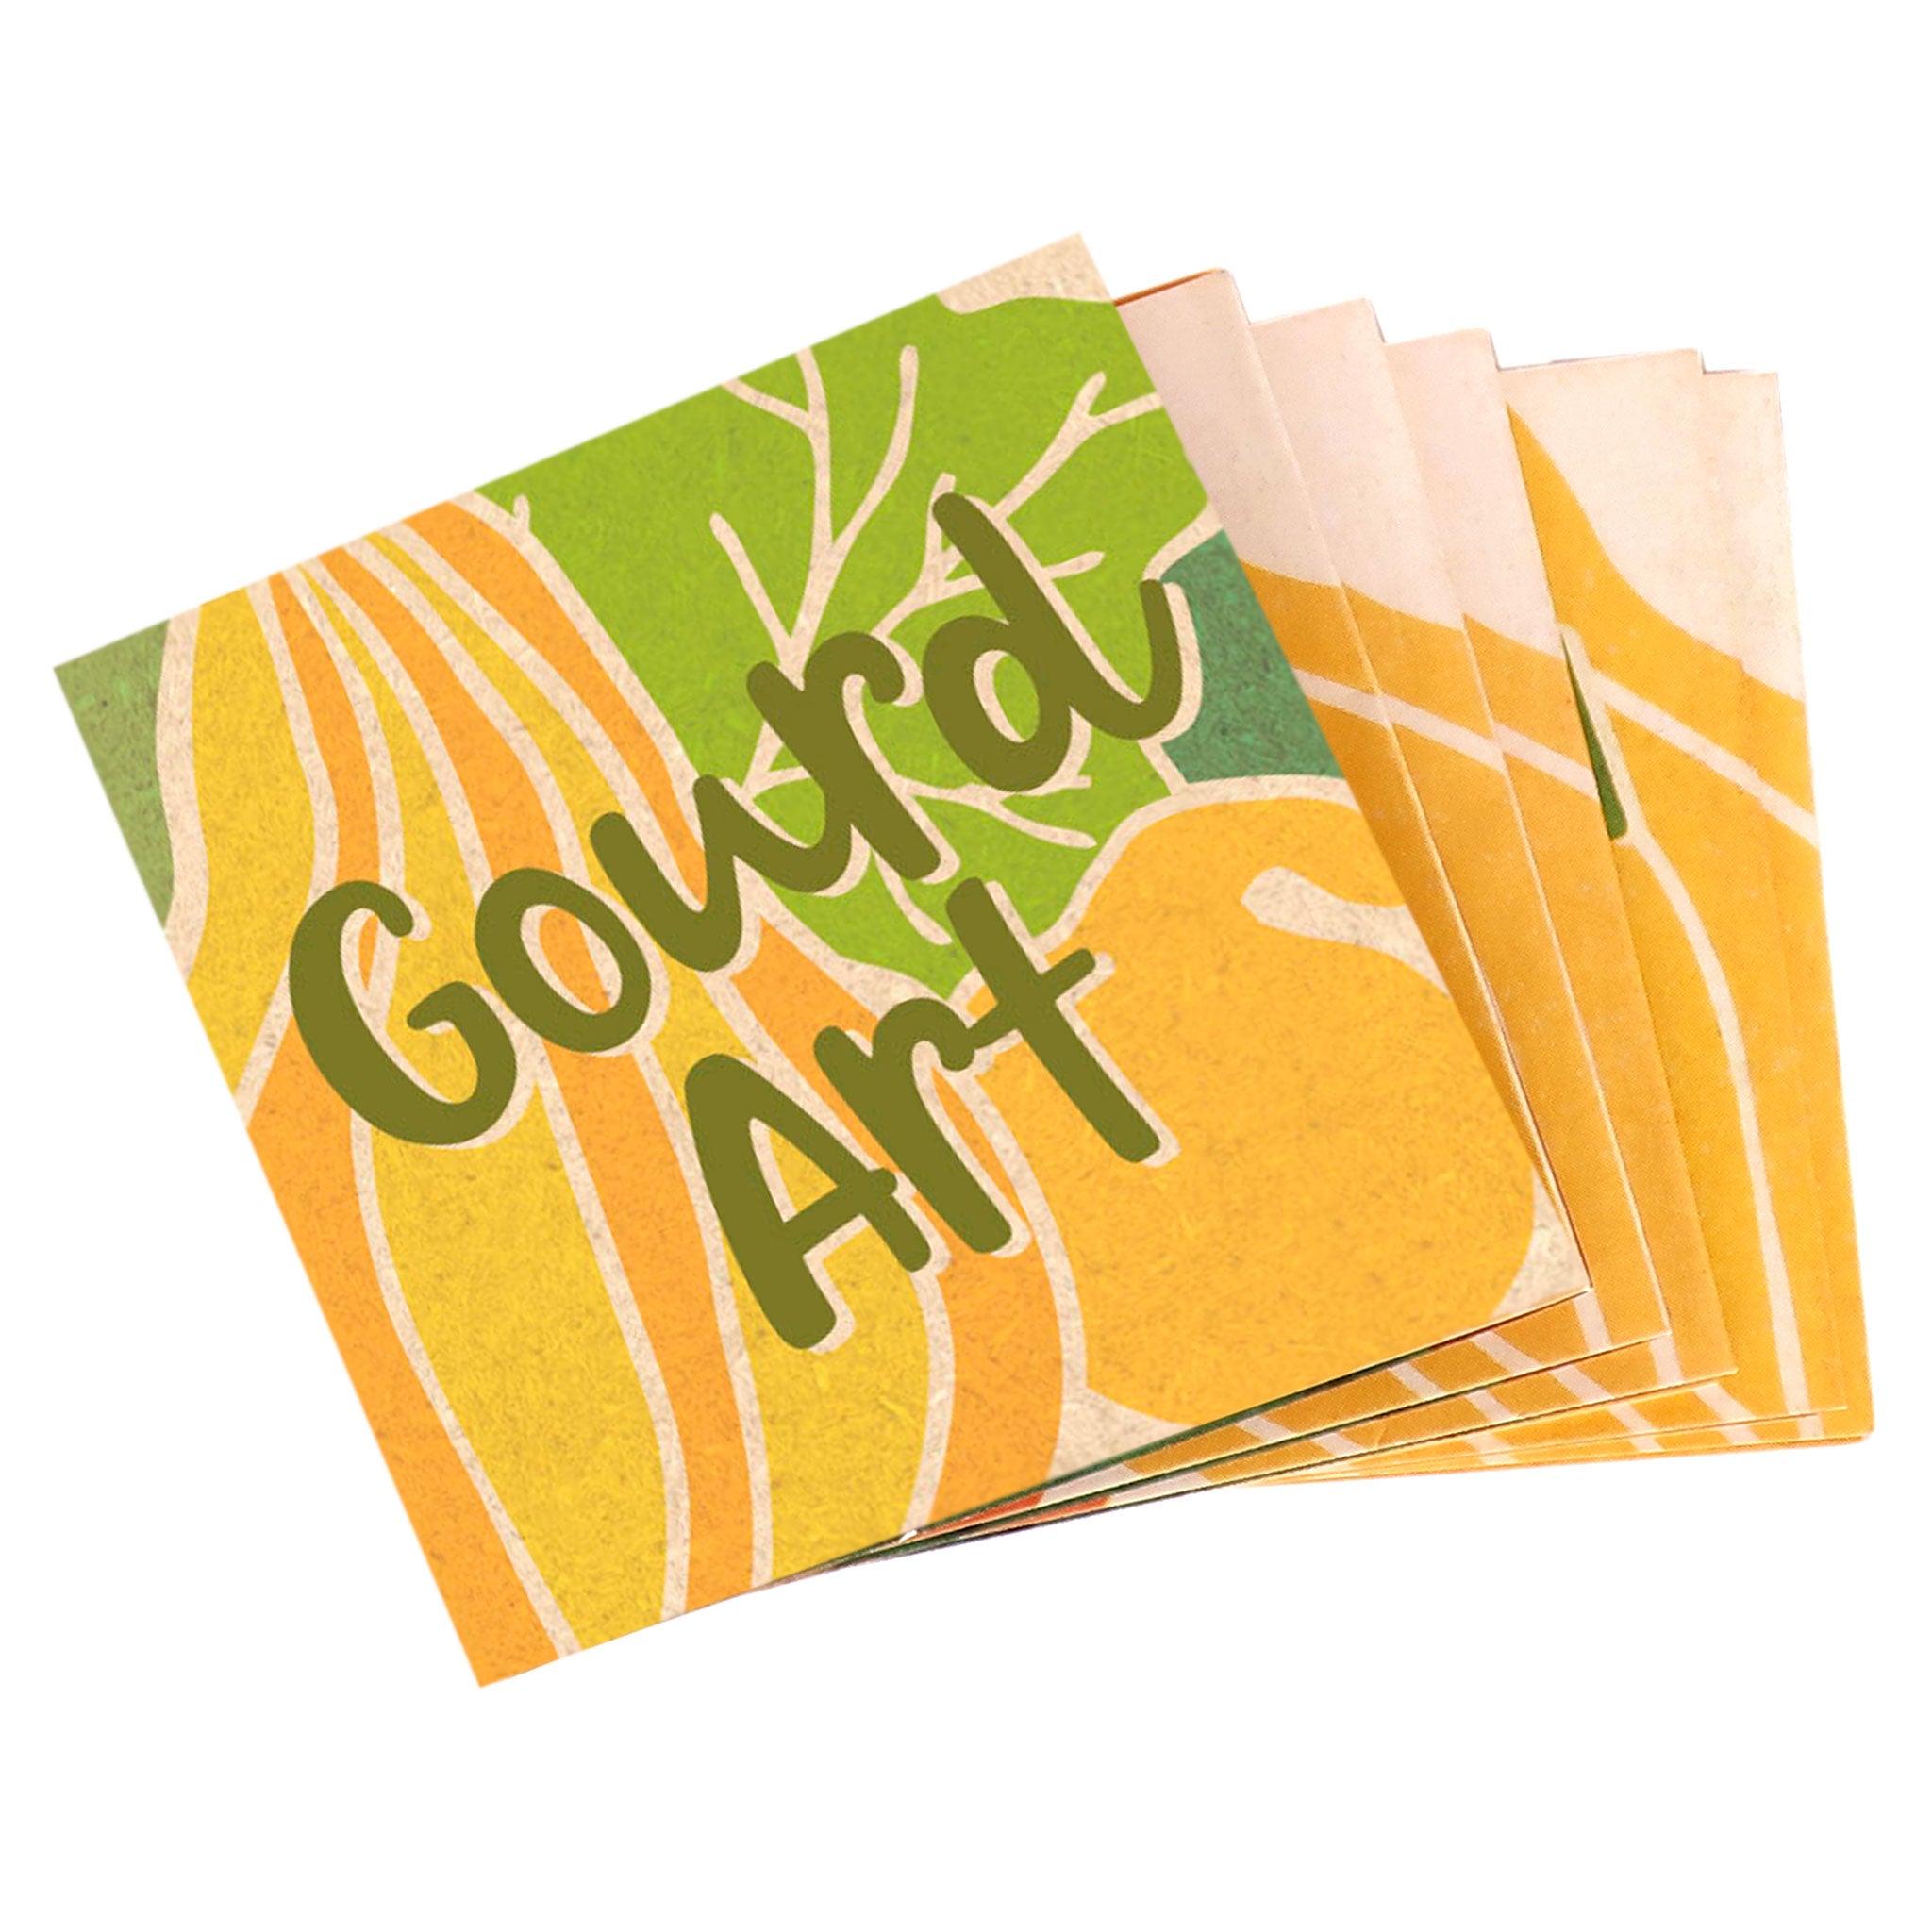 Carved Gourd Art Folded Tag (pack of 50)